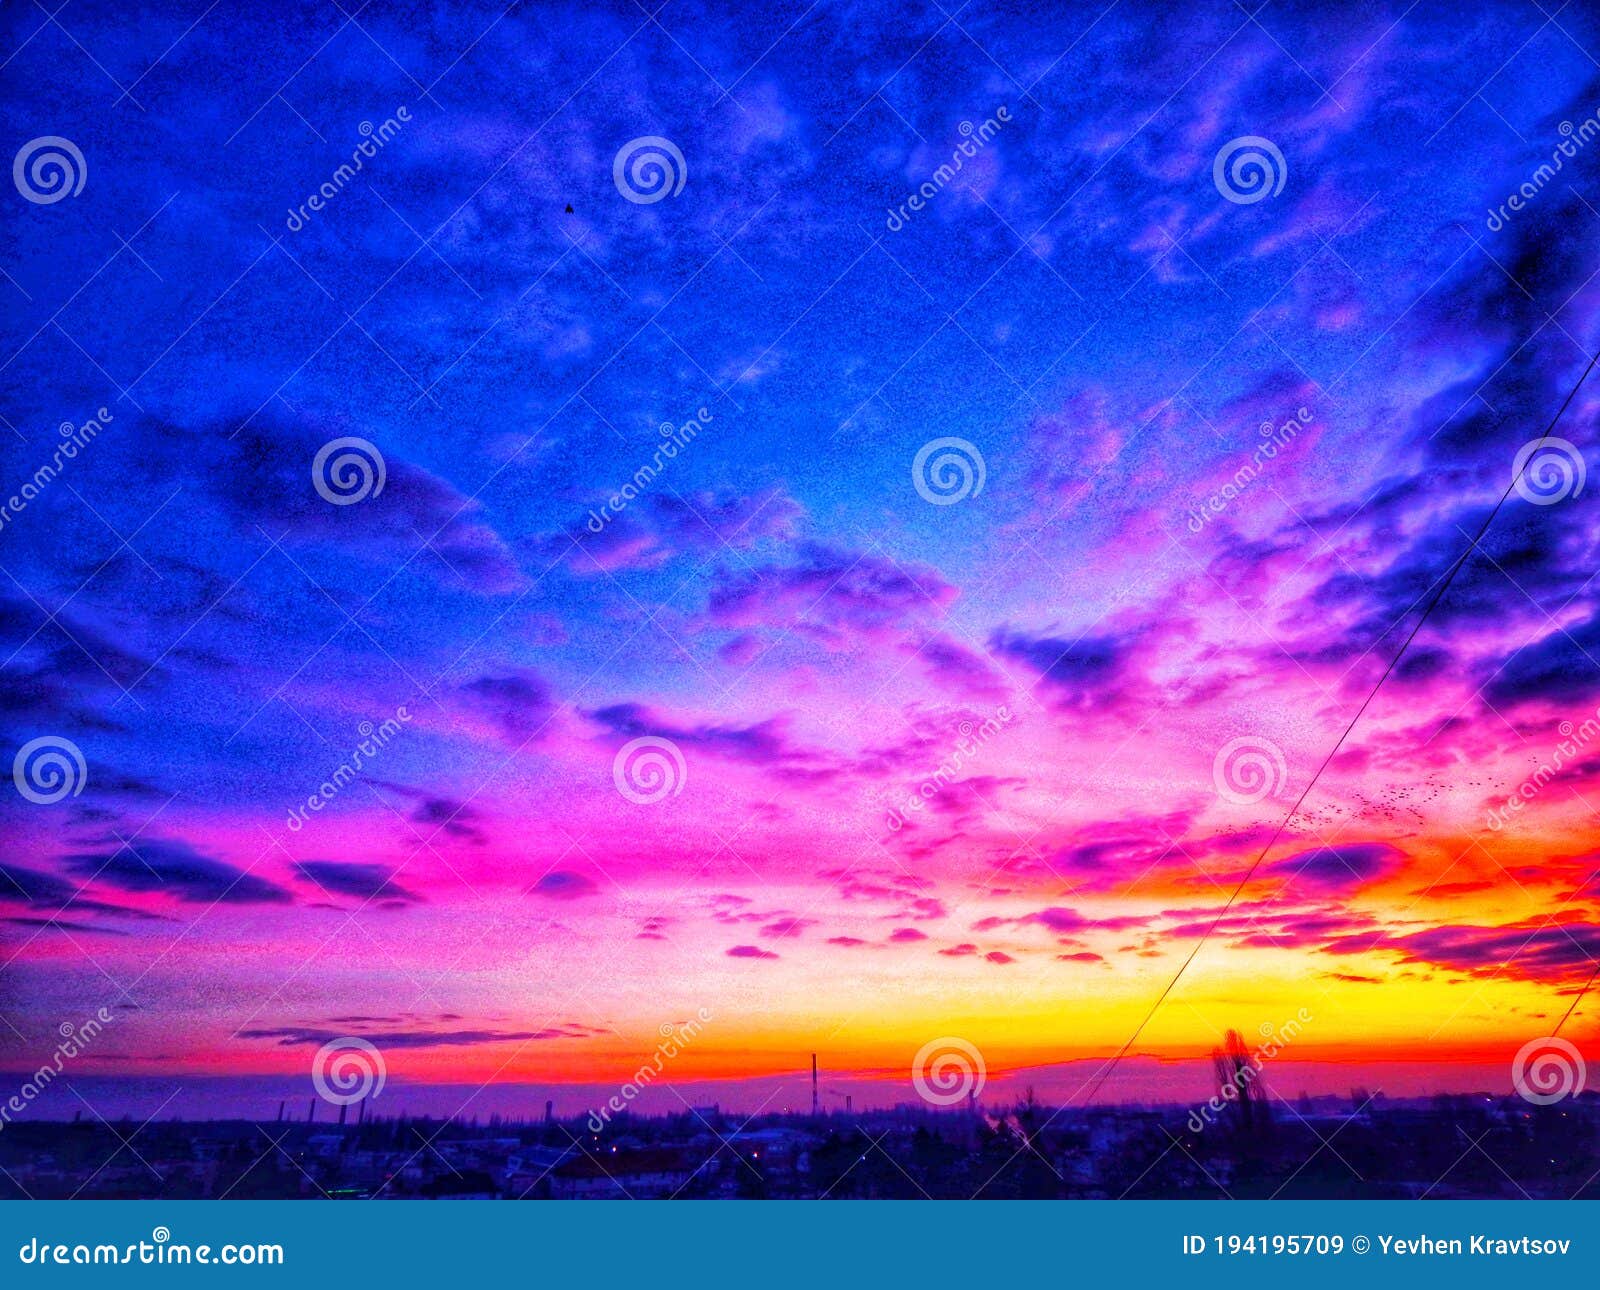 https://thumbs.dreamstime.com/z/bright-multicolored-sunrise-beautiful-colorful-sky-background-bright-multicolored-sunrise-beautiful-colorful-sky-background-194195709.jpg